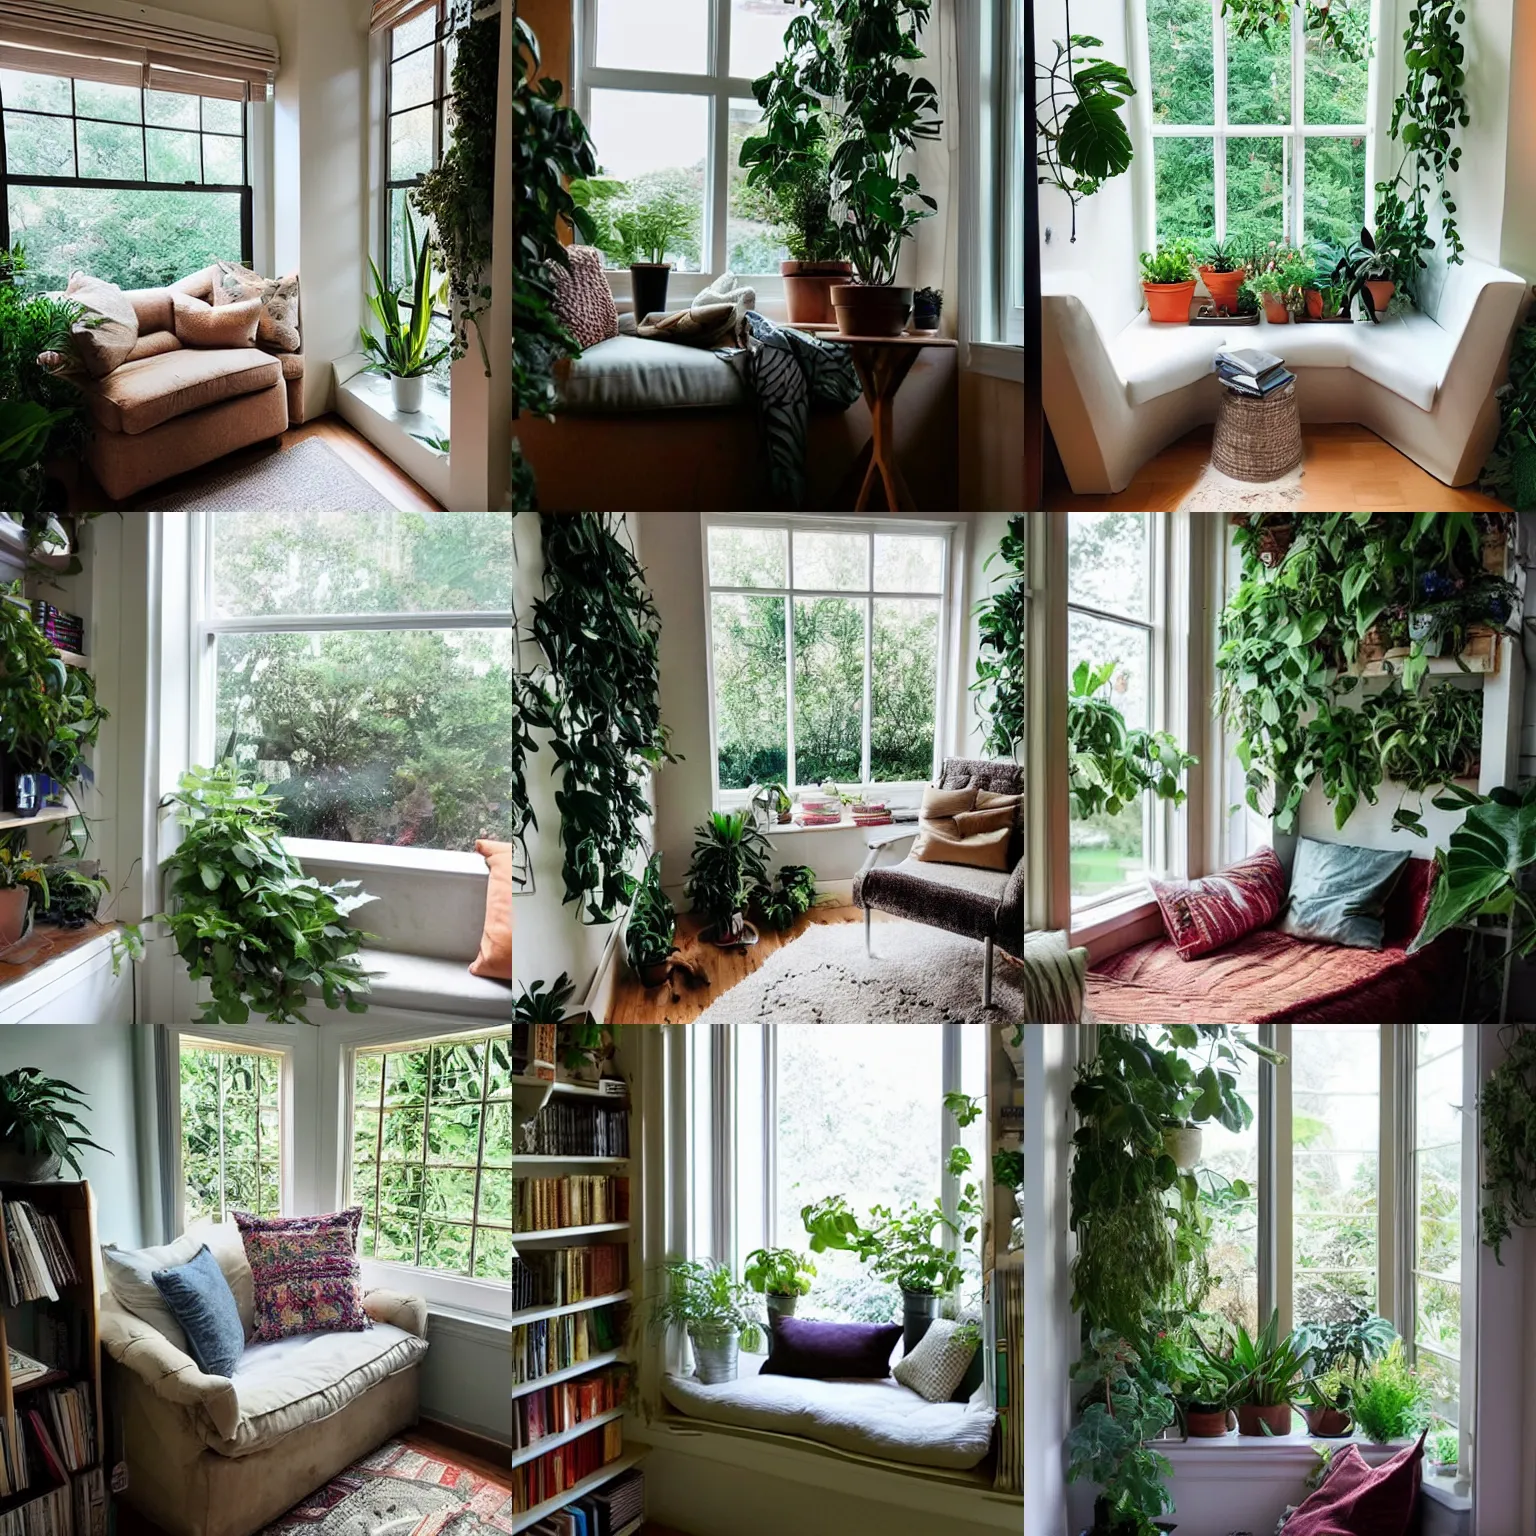 Prompt: a photo of a cozy reading nook by the window, full of plants